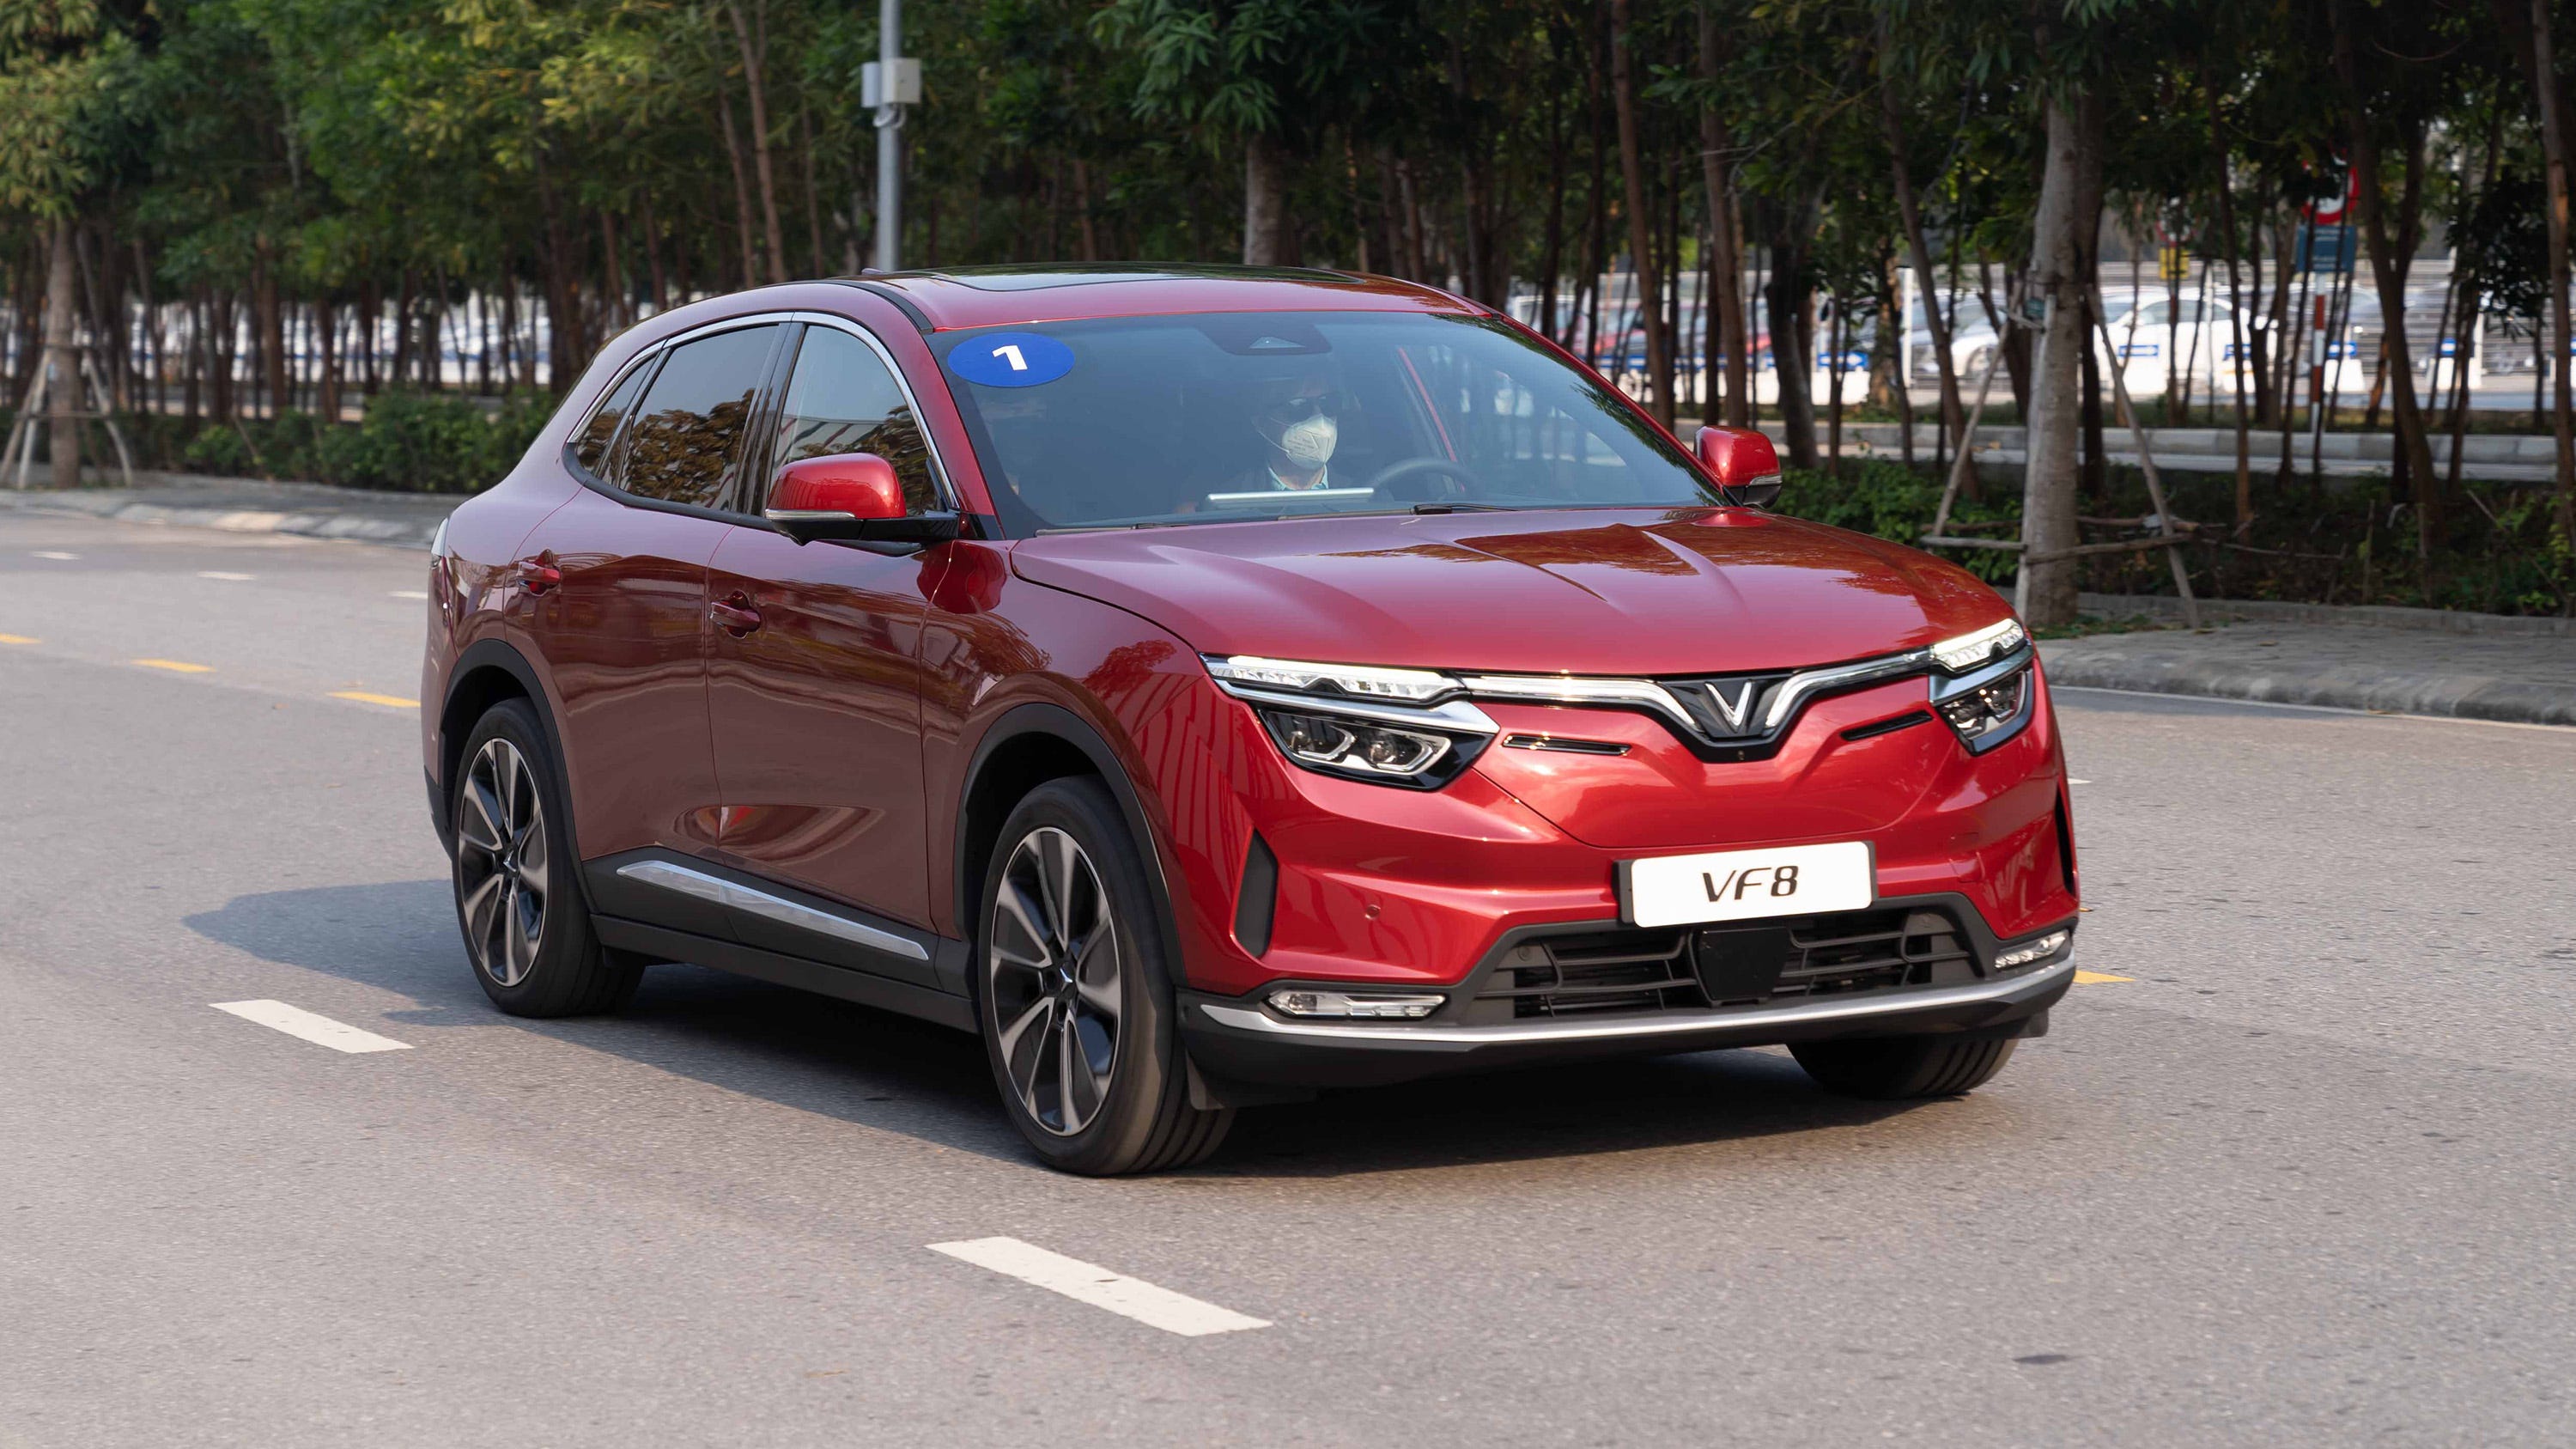 2023 Vinfast Vf 8 First Drive Review: Testing Vietnam'S First Ev For  America - Cnet